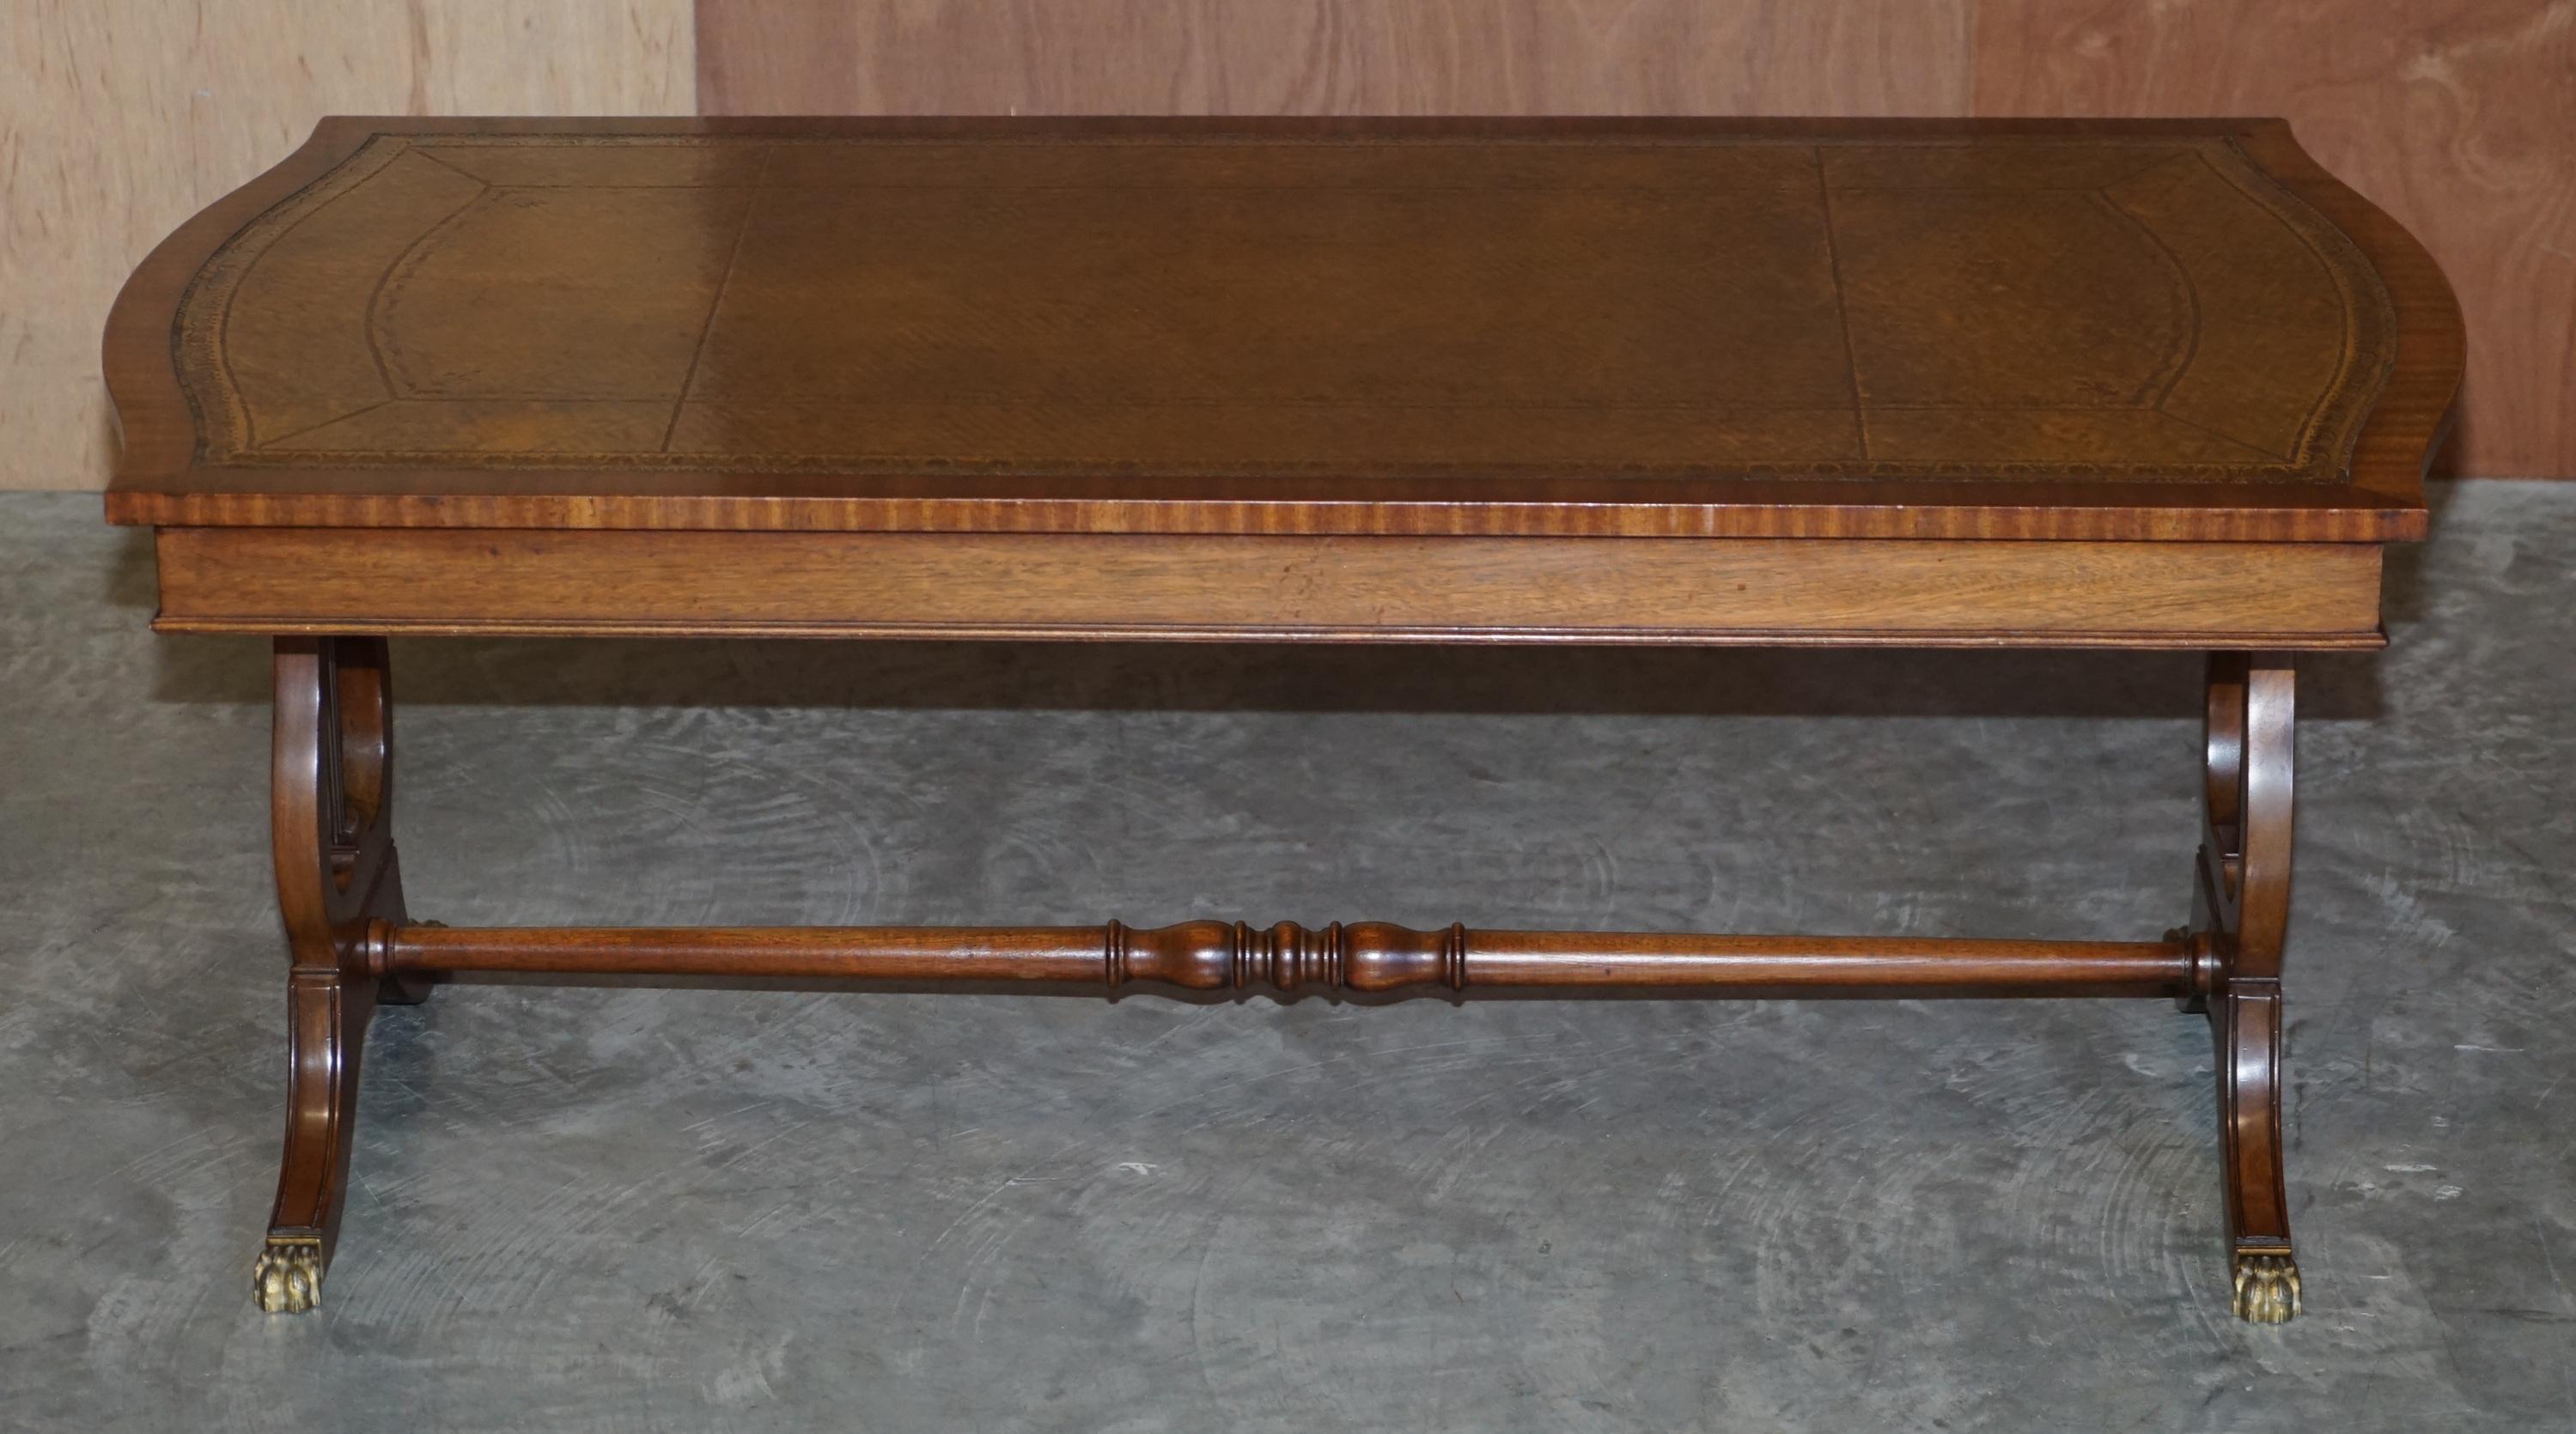 We are delighted to offer this stunning hand made in England mahogany and brown leather large coffee or cocktail table

A very decorative and well made piece, the top is upholstered with heritage leather which is hand dyed this lovely cigar brown